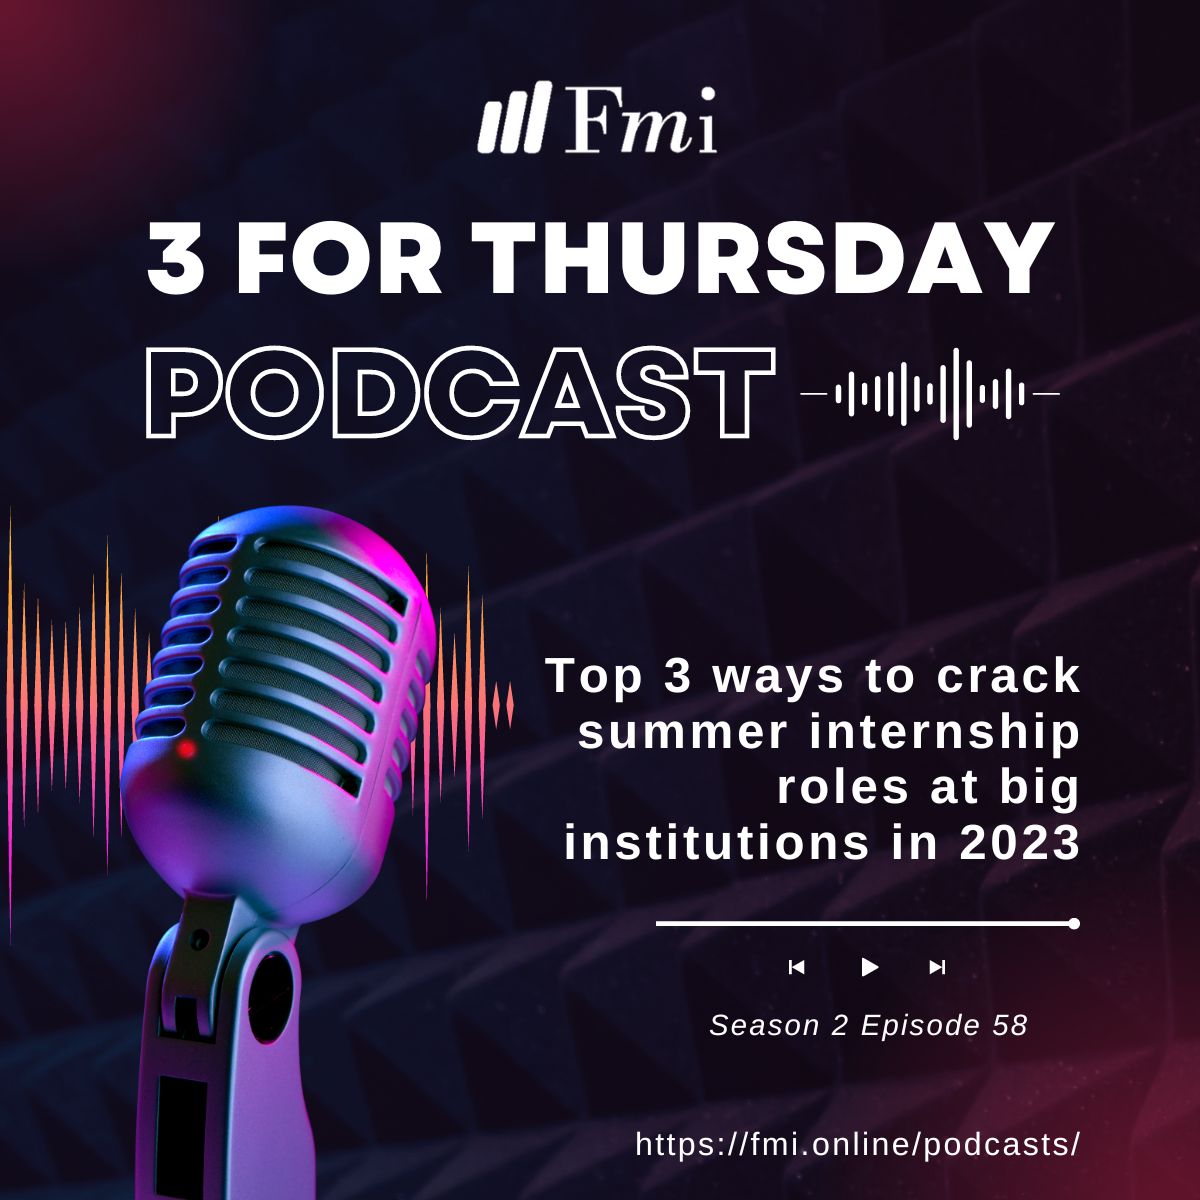 Top 3 ways to crack summer internship roles at big institutions in 2023